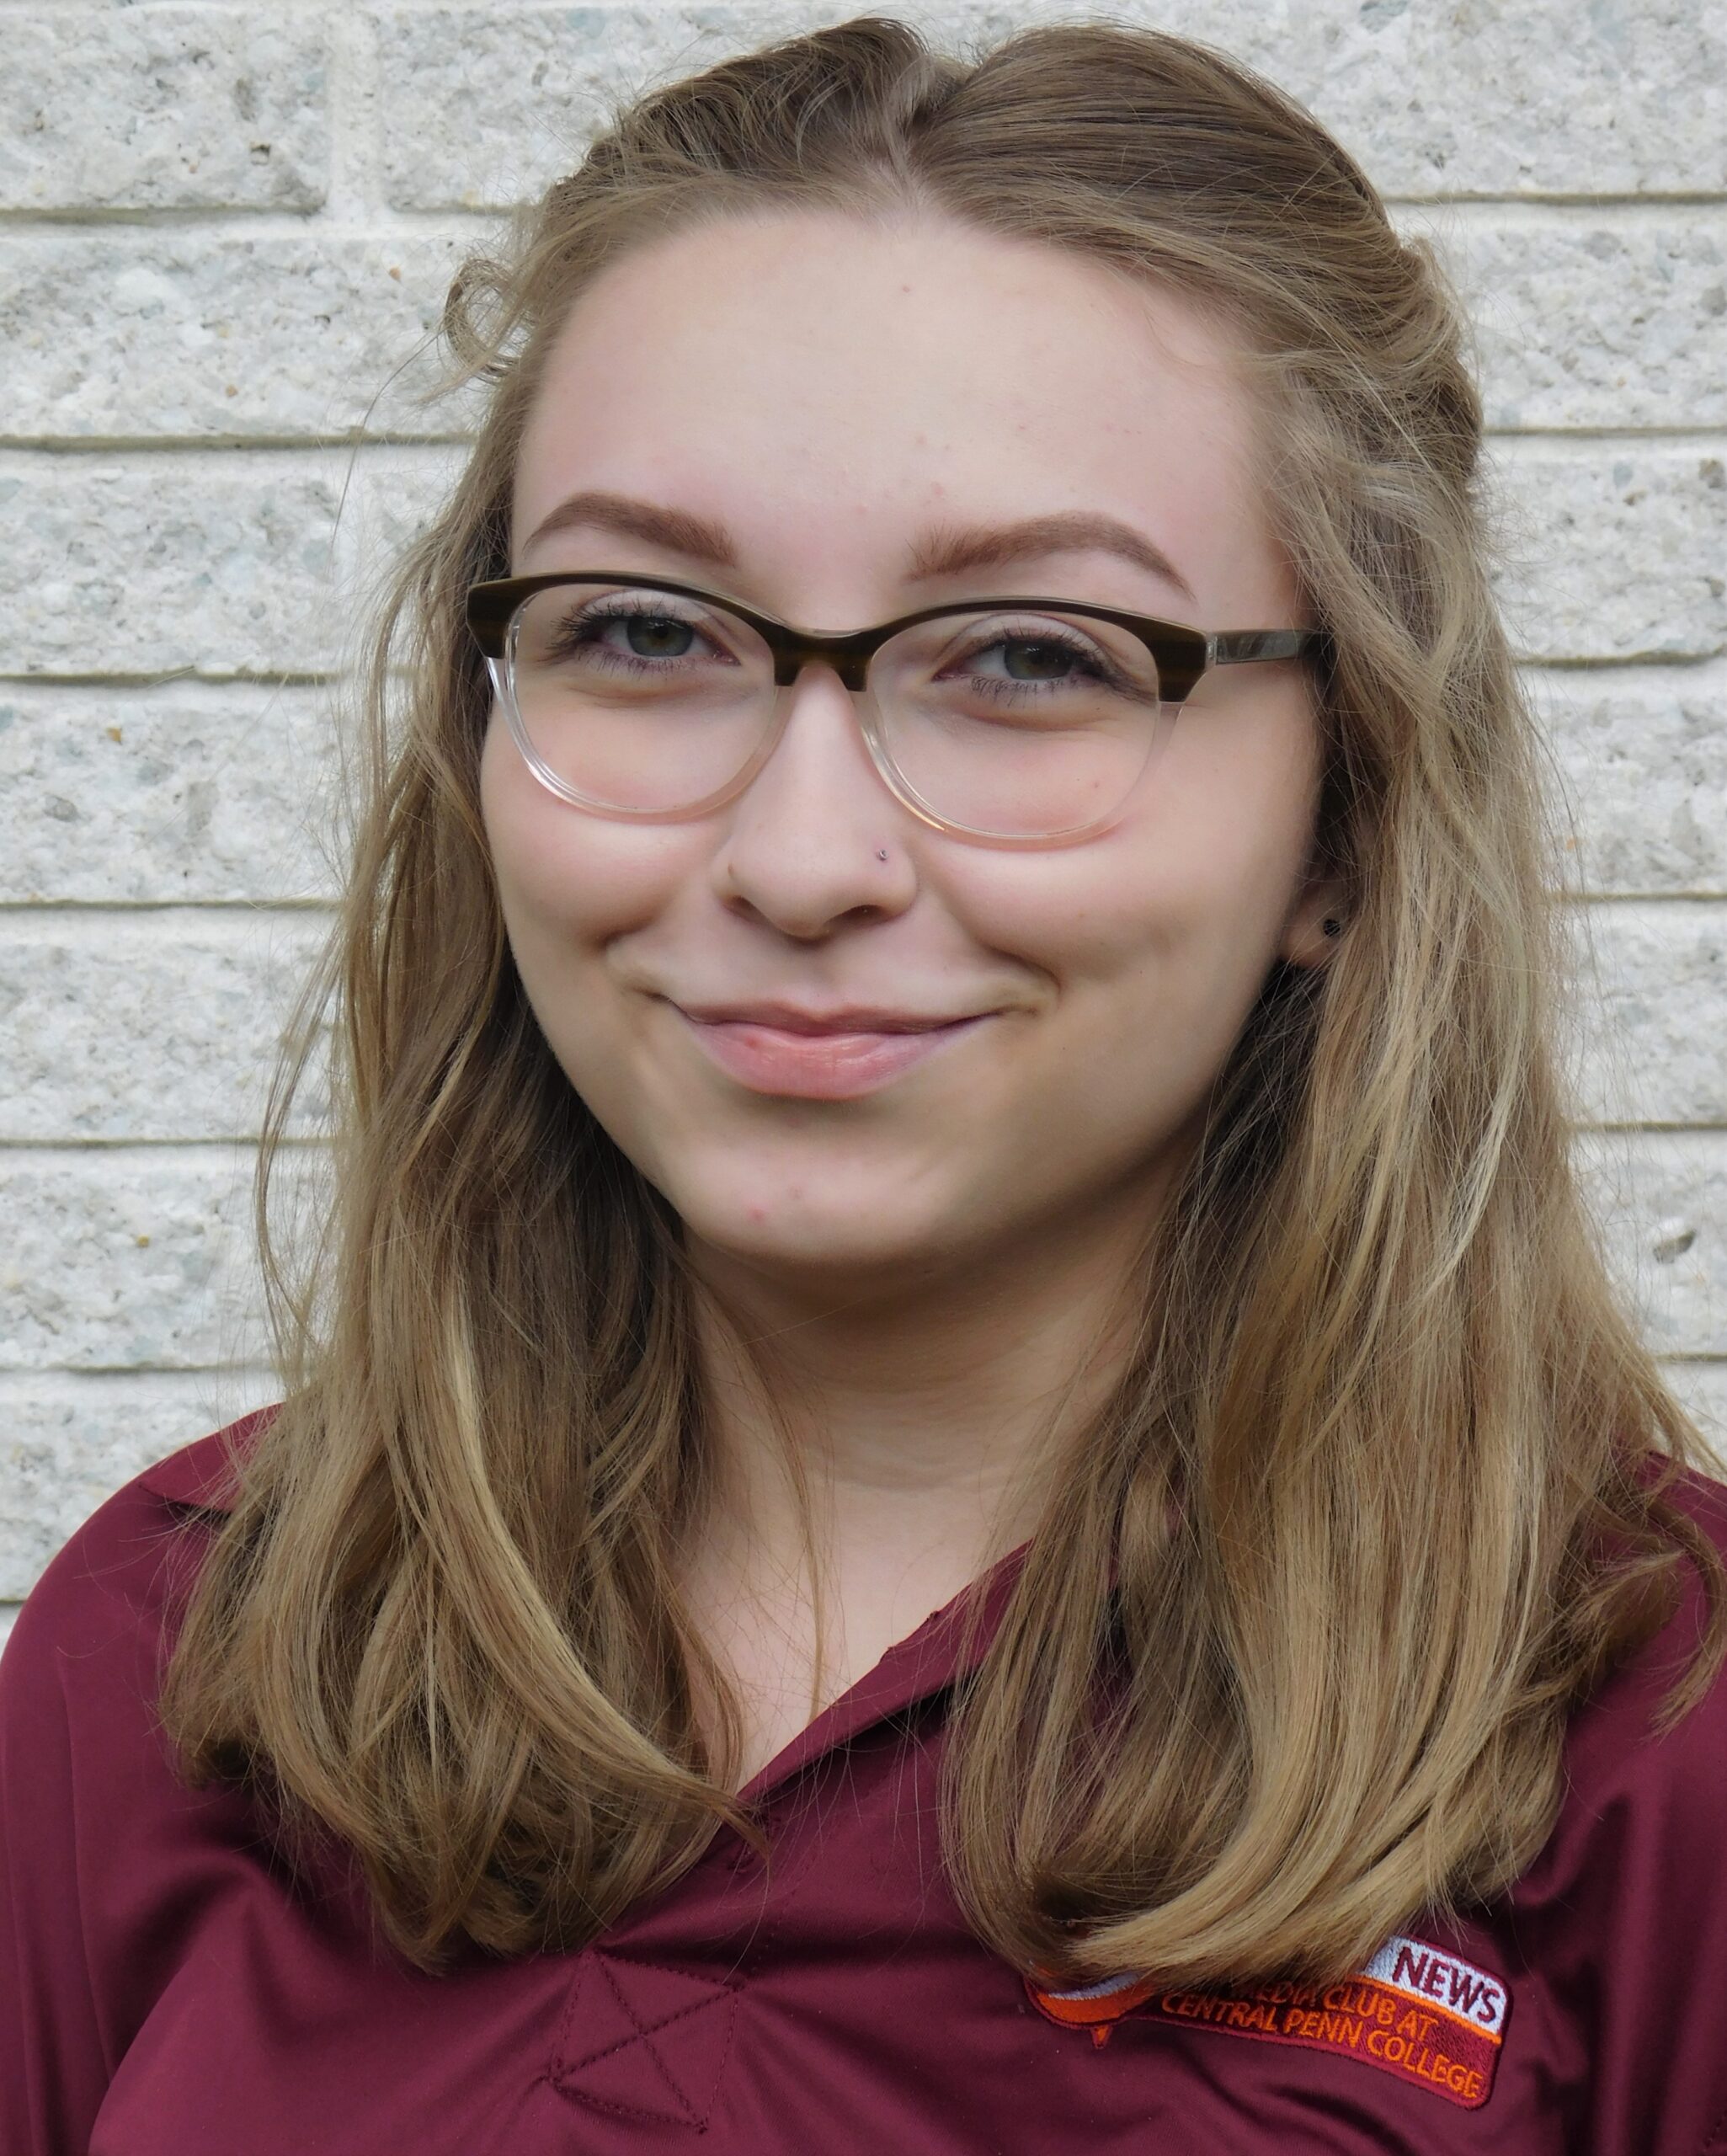 Young blond woman with glasses smiling